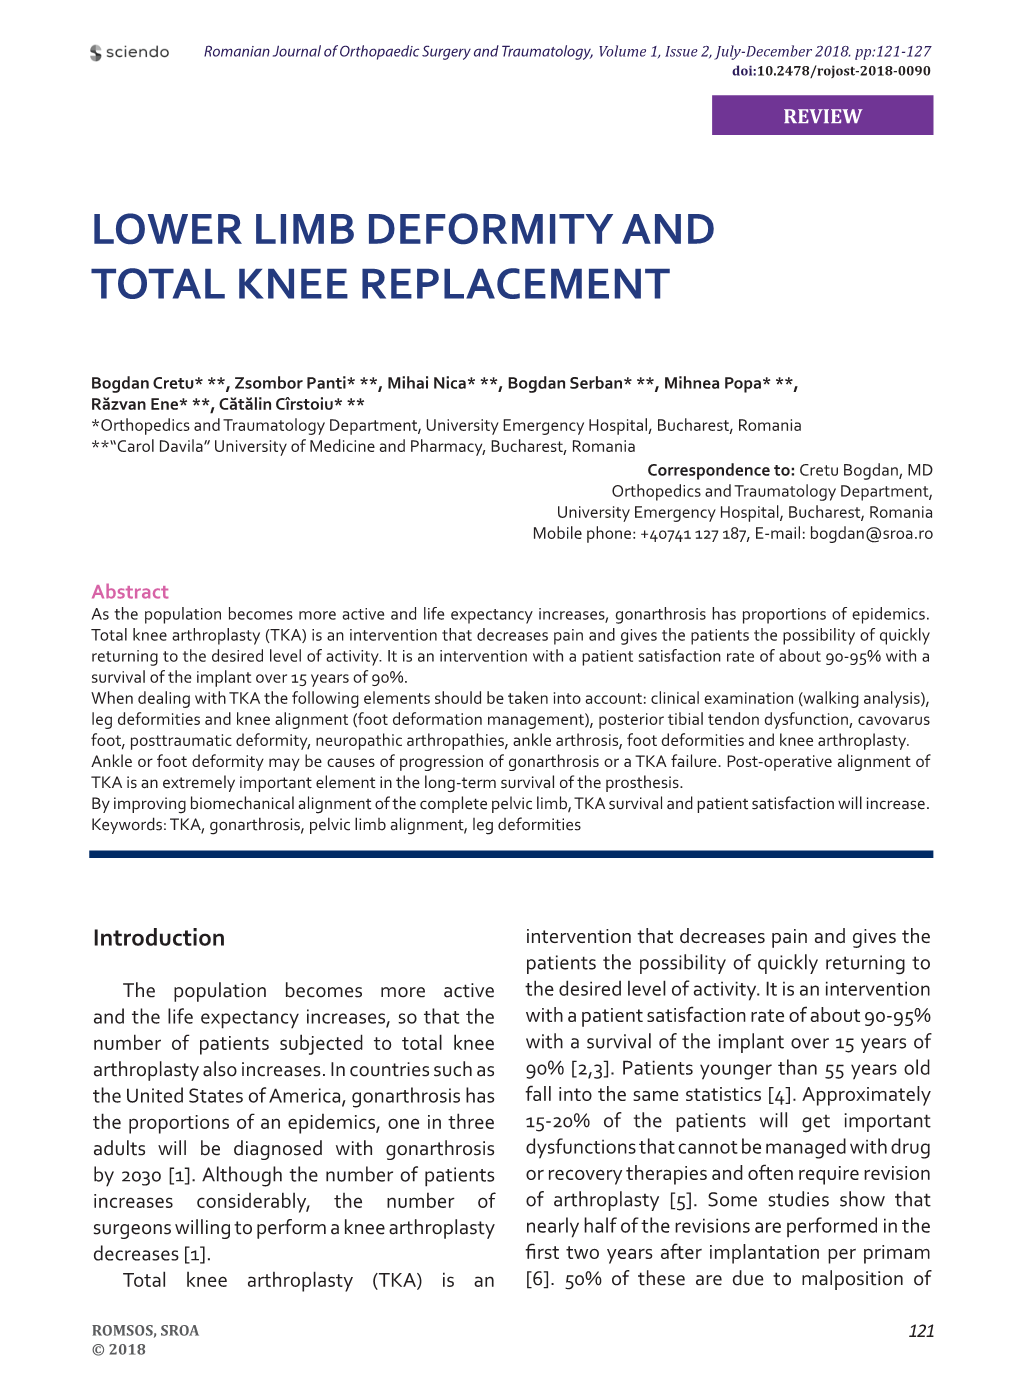 Lower Limb Deformity and Total Knee Replacement